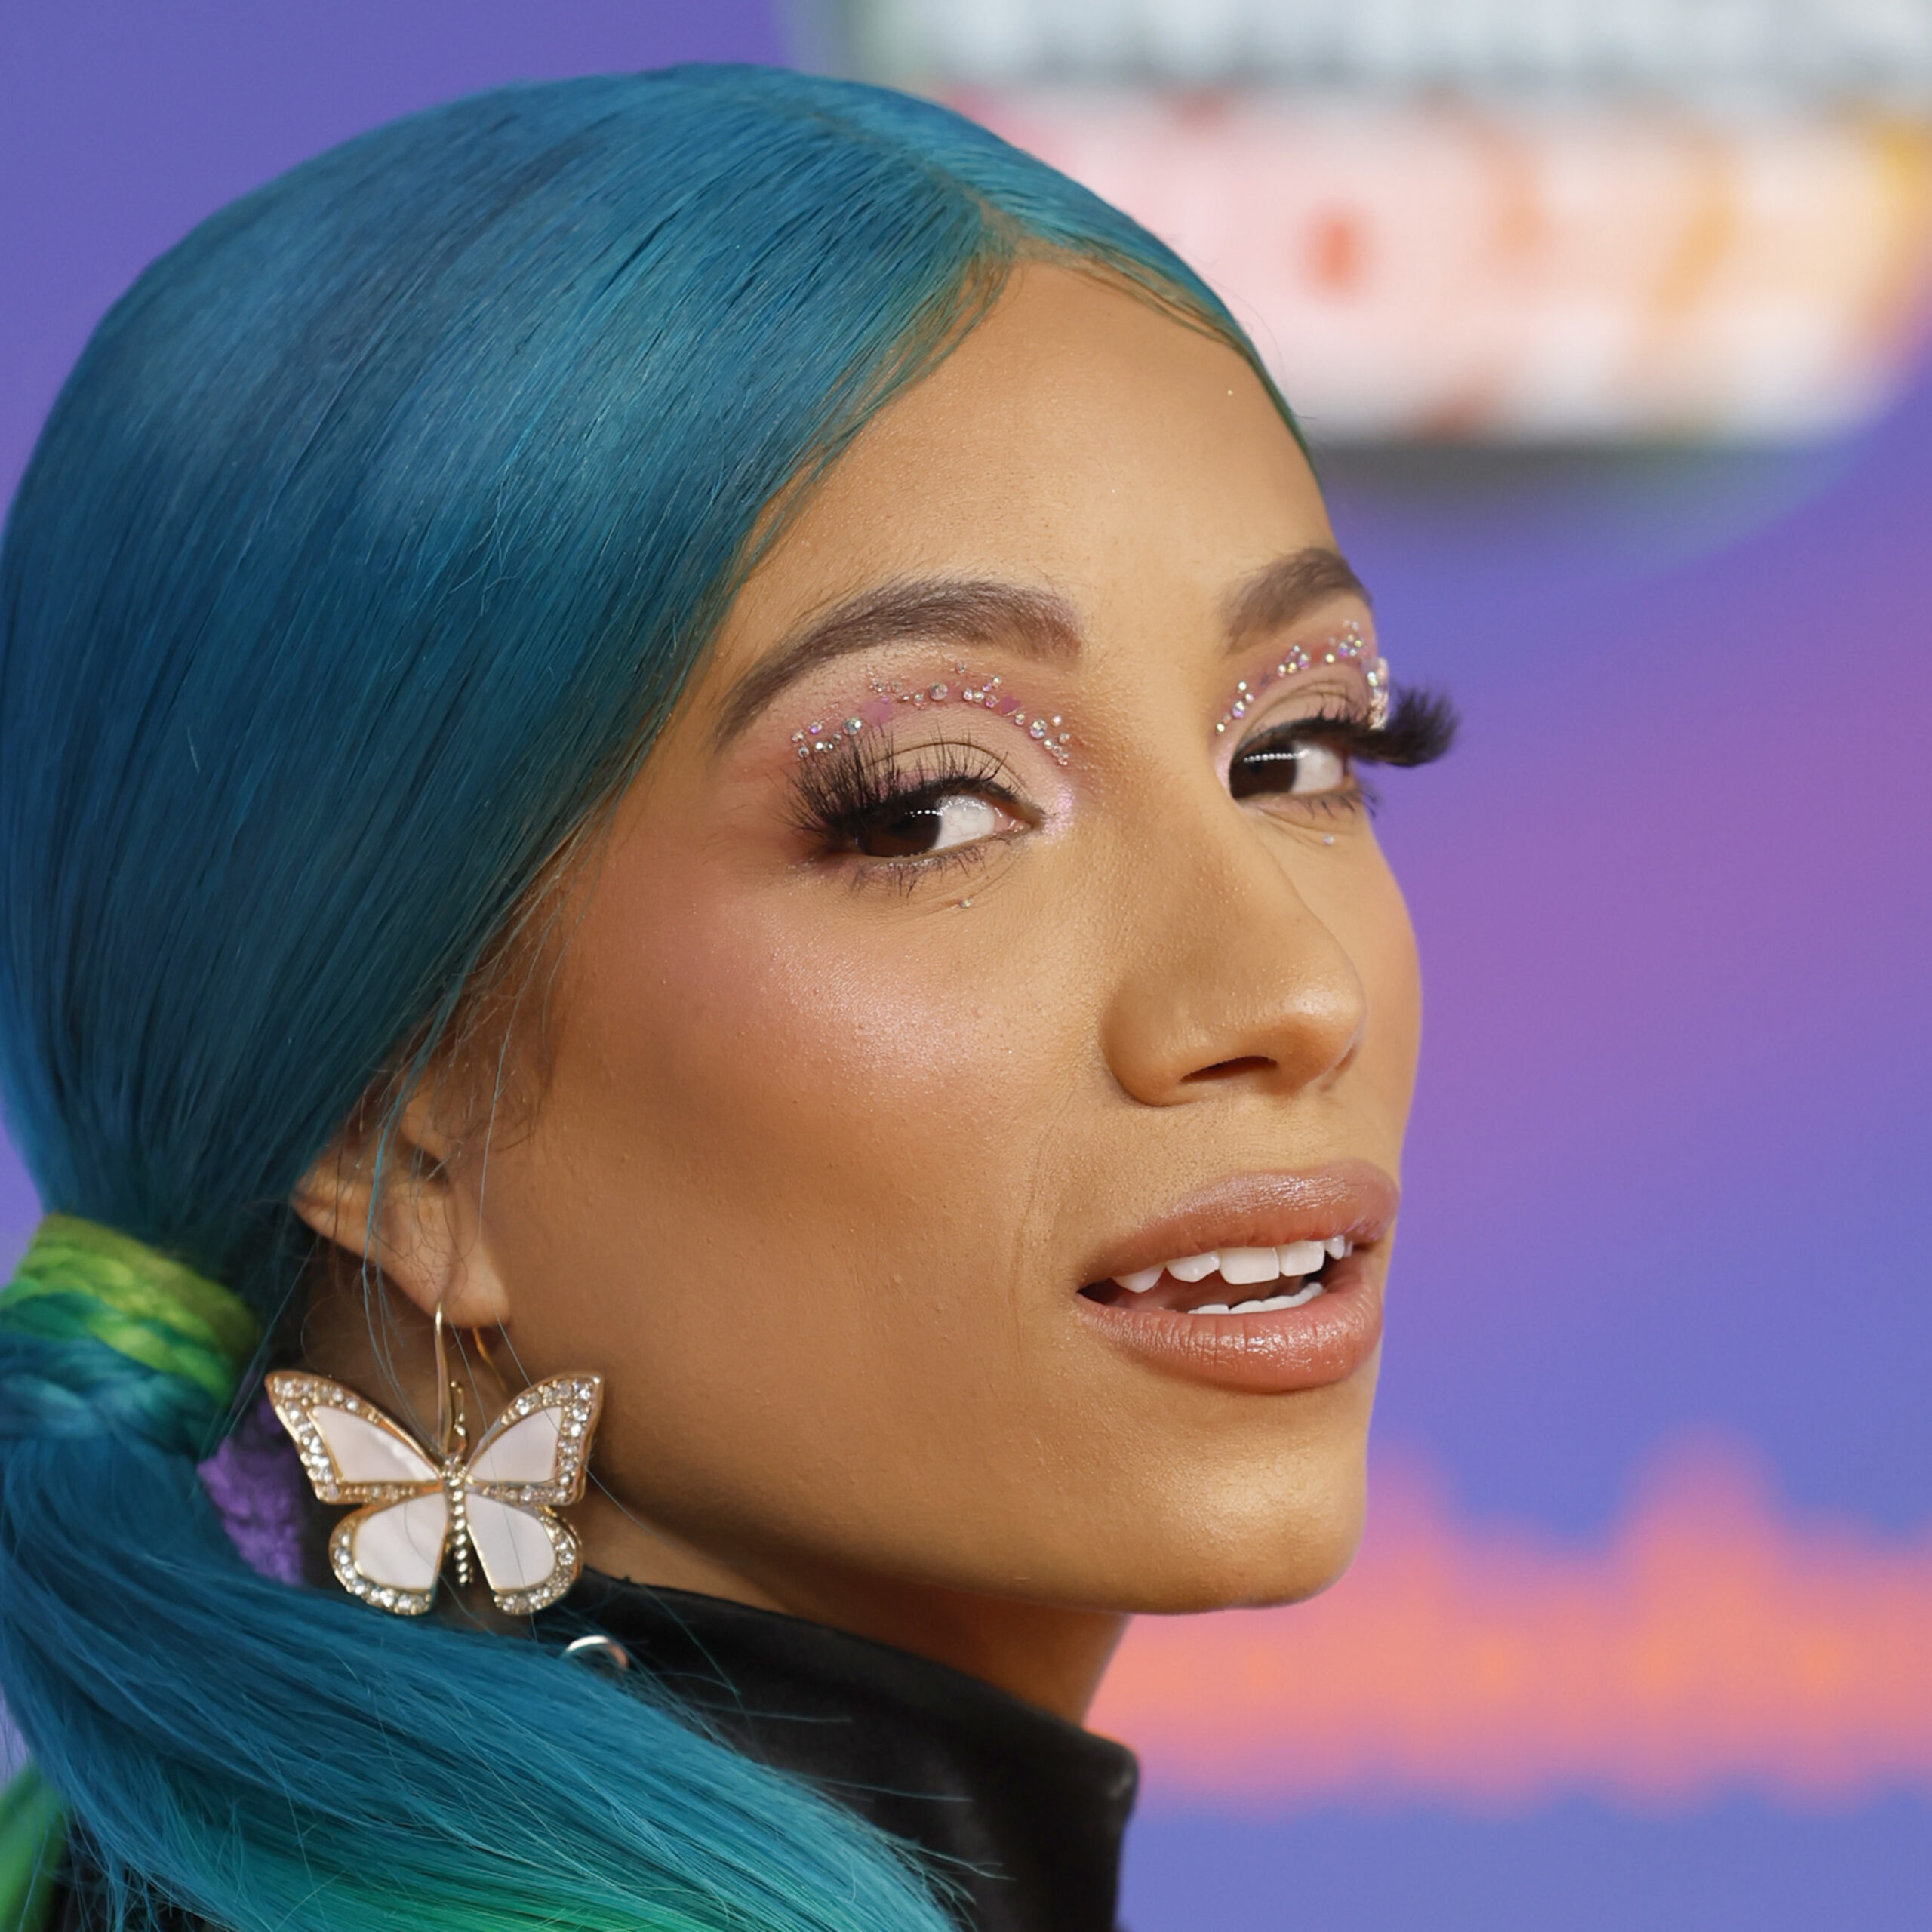 You are currently viewing Backstage WWE and AEW Rumors: Latest on Sasha Banks, Unified Title and More | Bleacher Report